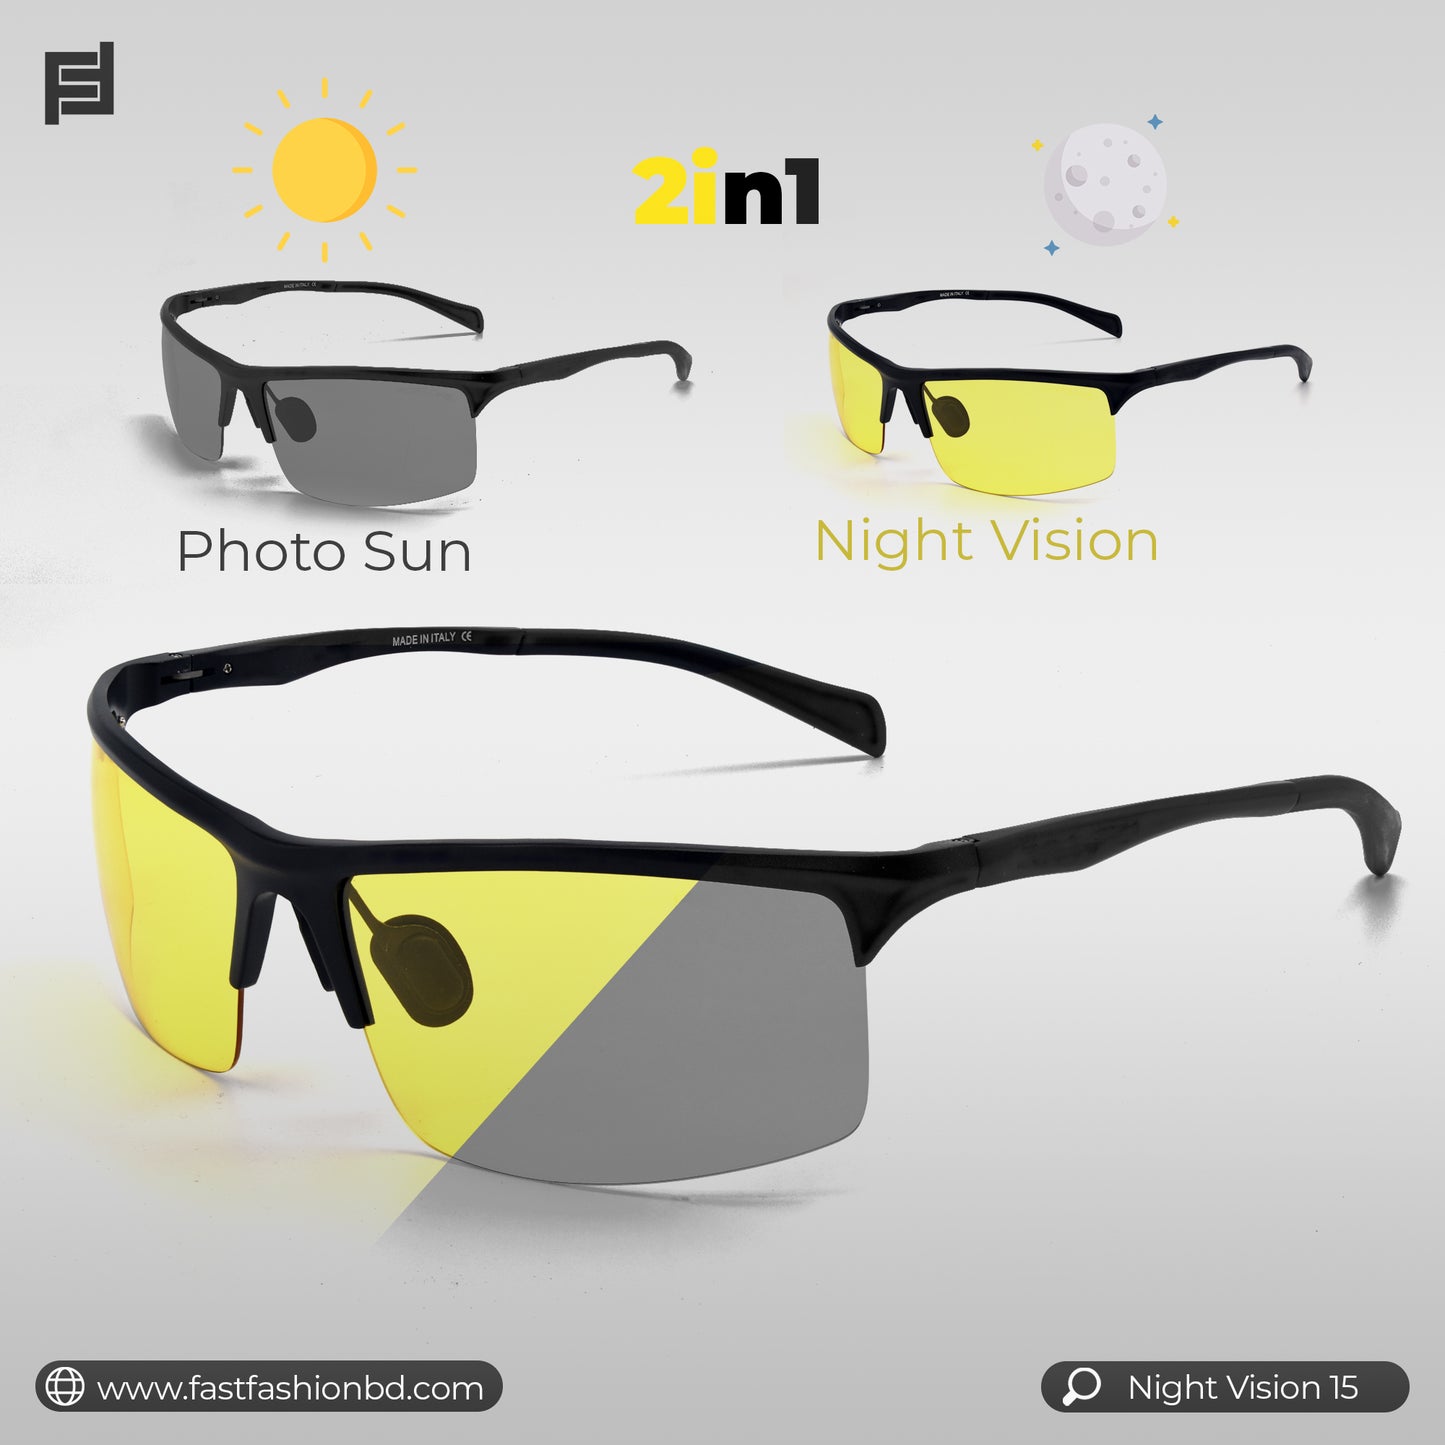 2in1 Sunglass Night Vision and Photo Sun - Night Vision 15